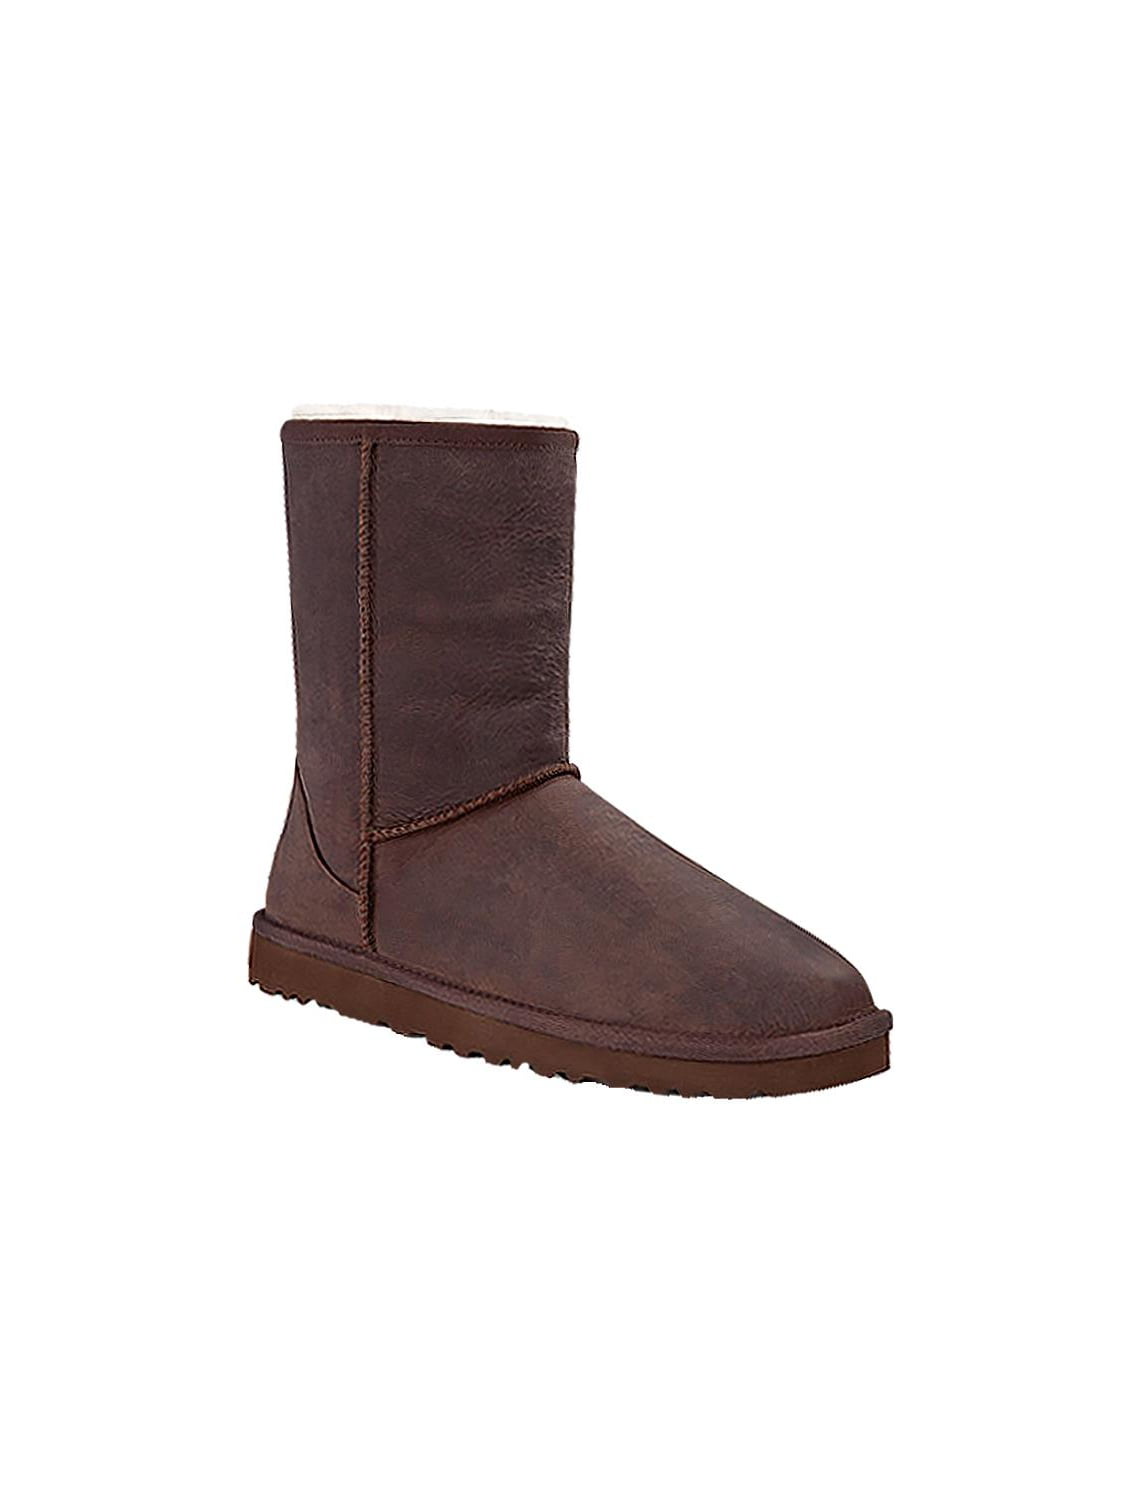 ugg classic short leather brownstone